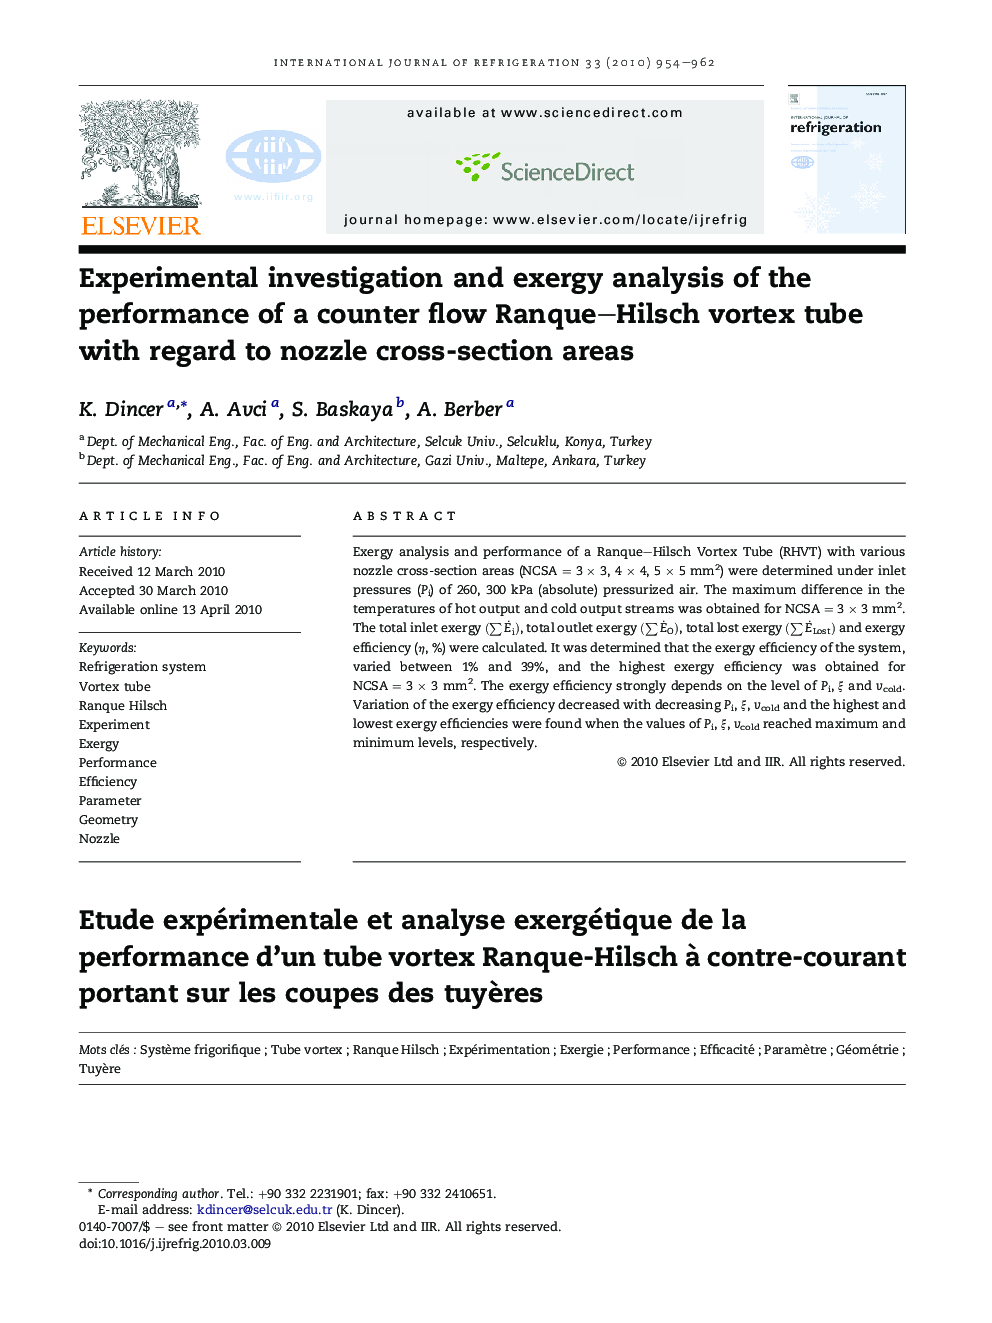 Experimental investigation and exergy analysis of the performance of a counter flow Ranque–Hilsch vortex tube with regard to nozzle cross-section areas